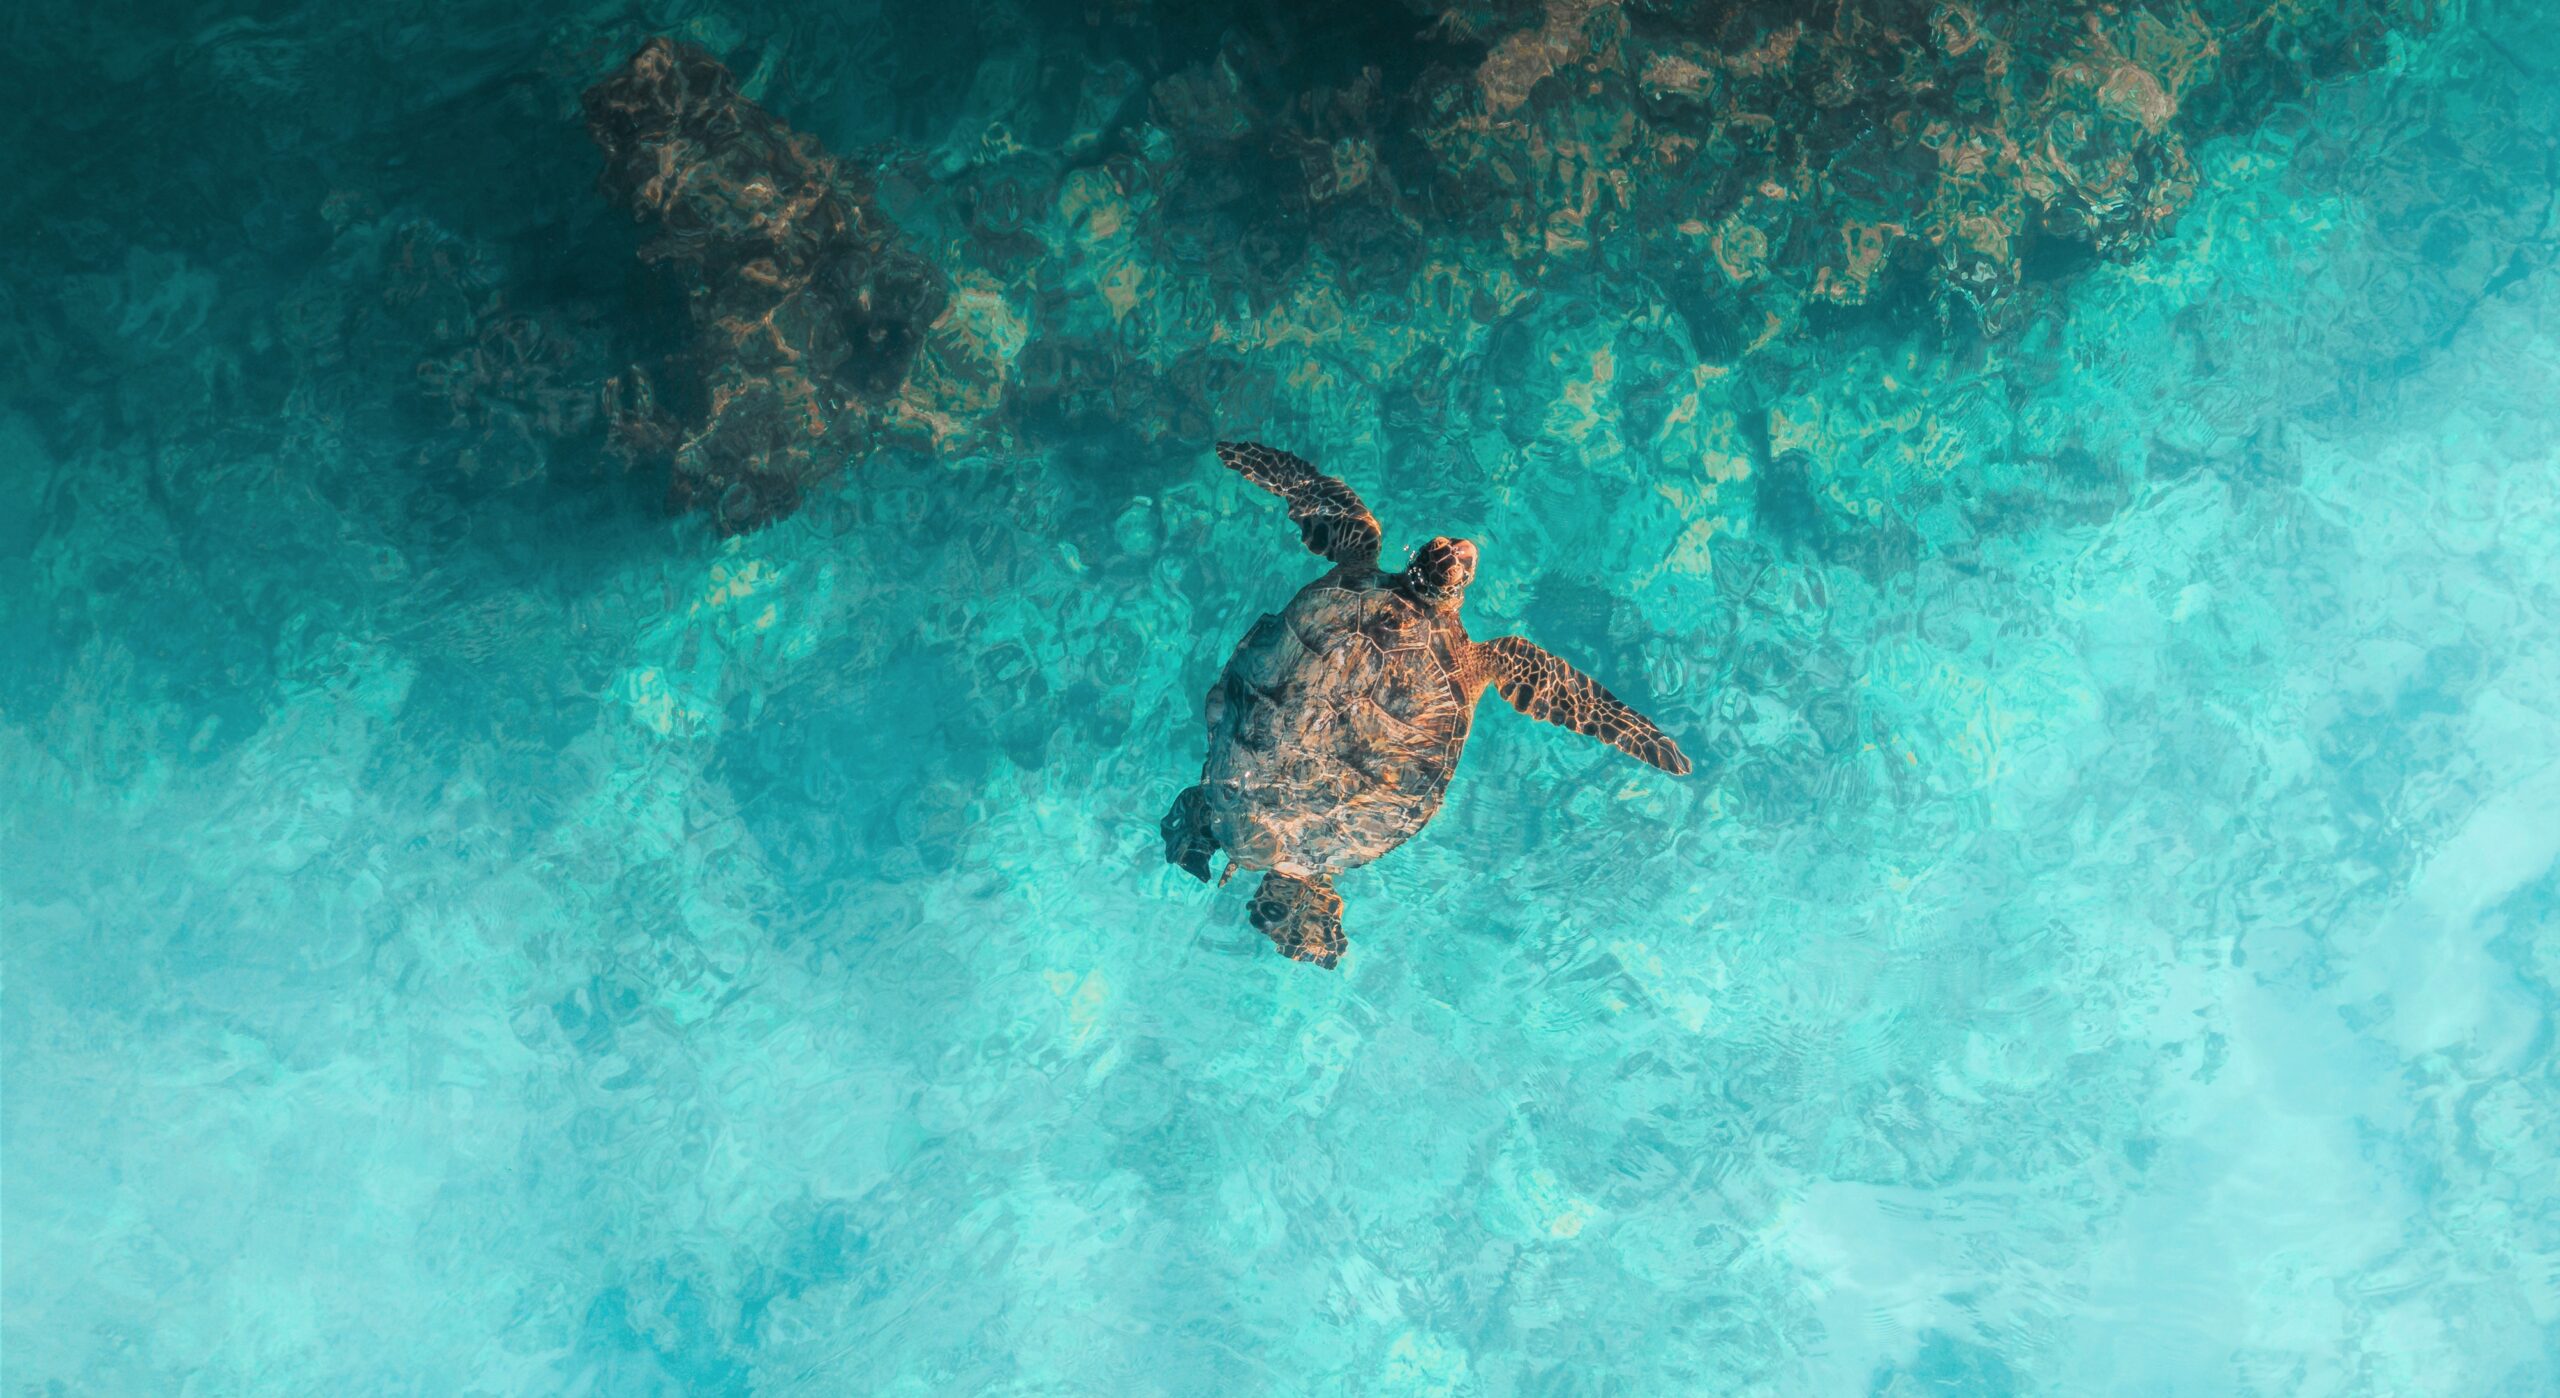 A sea turtle is gracefully swimming in bright turquoise waters.